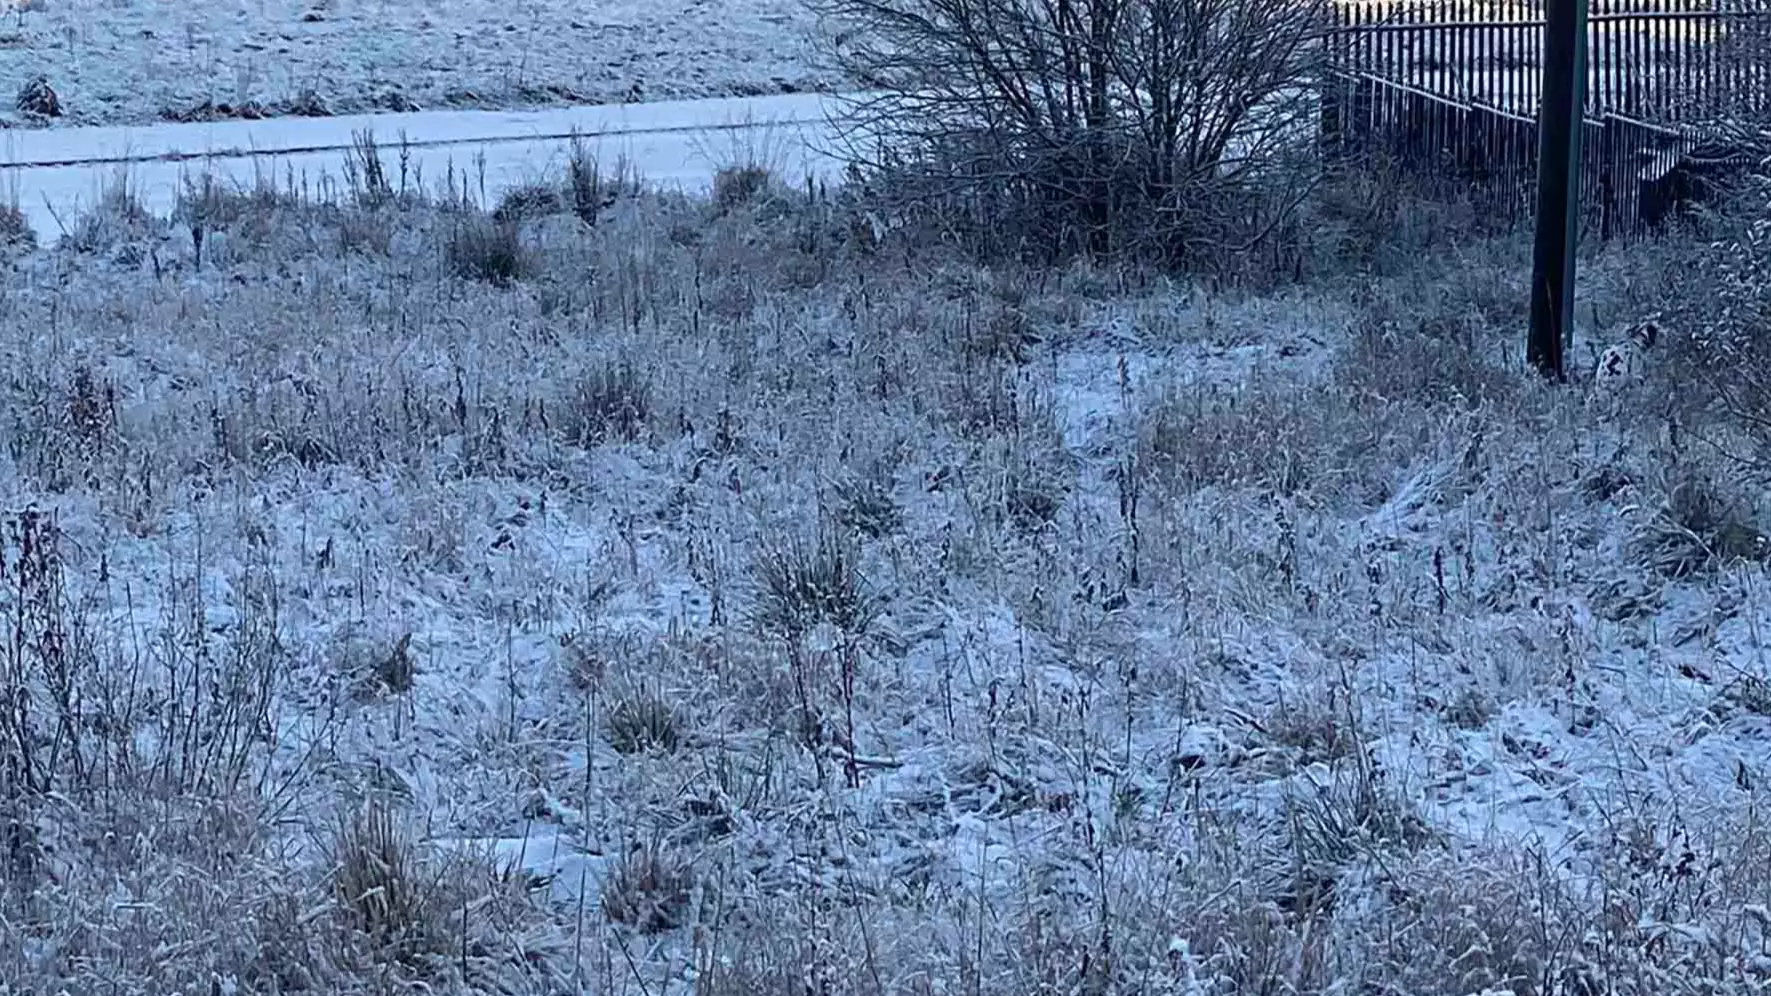 Man Challenges Twitters Users To Spot Dalmatian Having A Poo In Snow